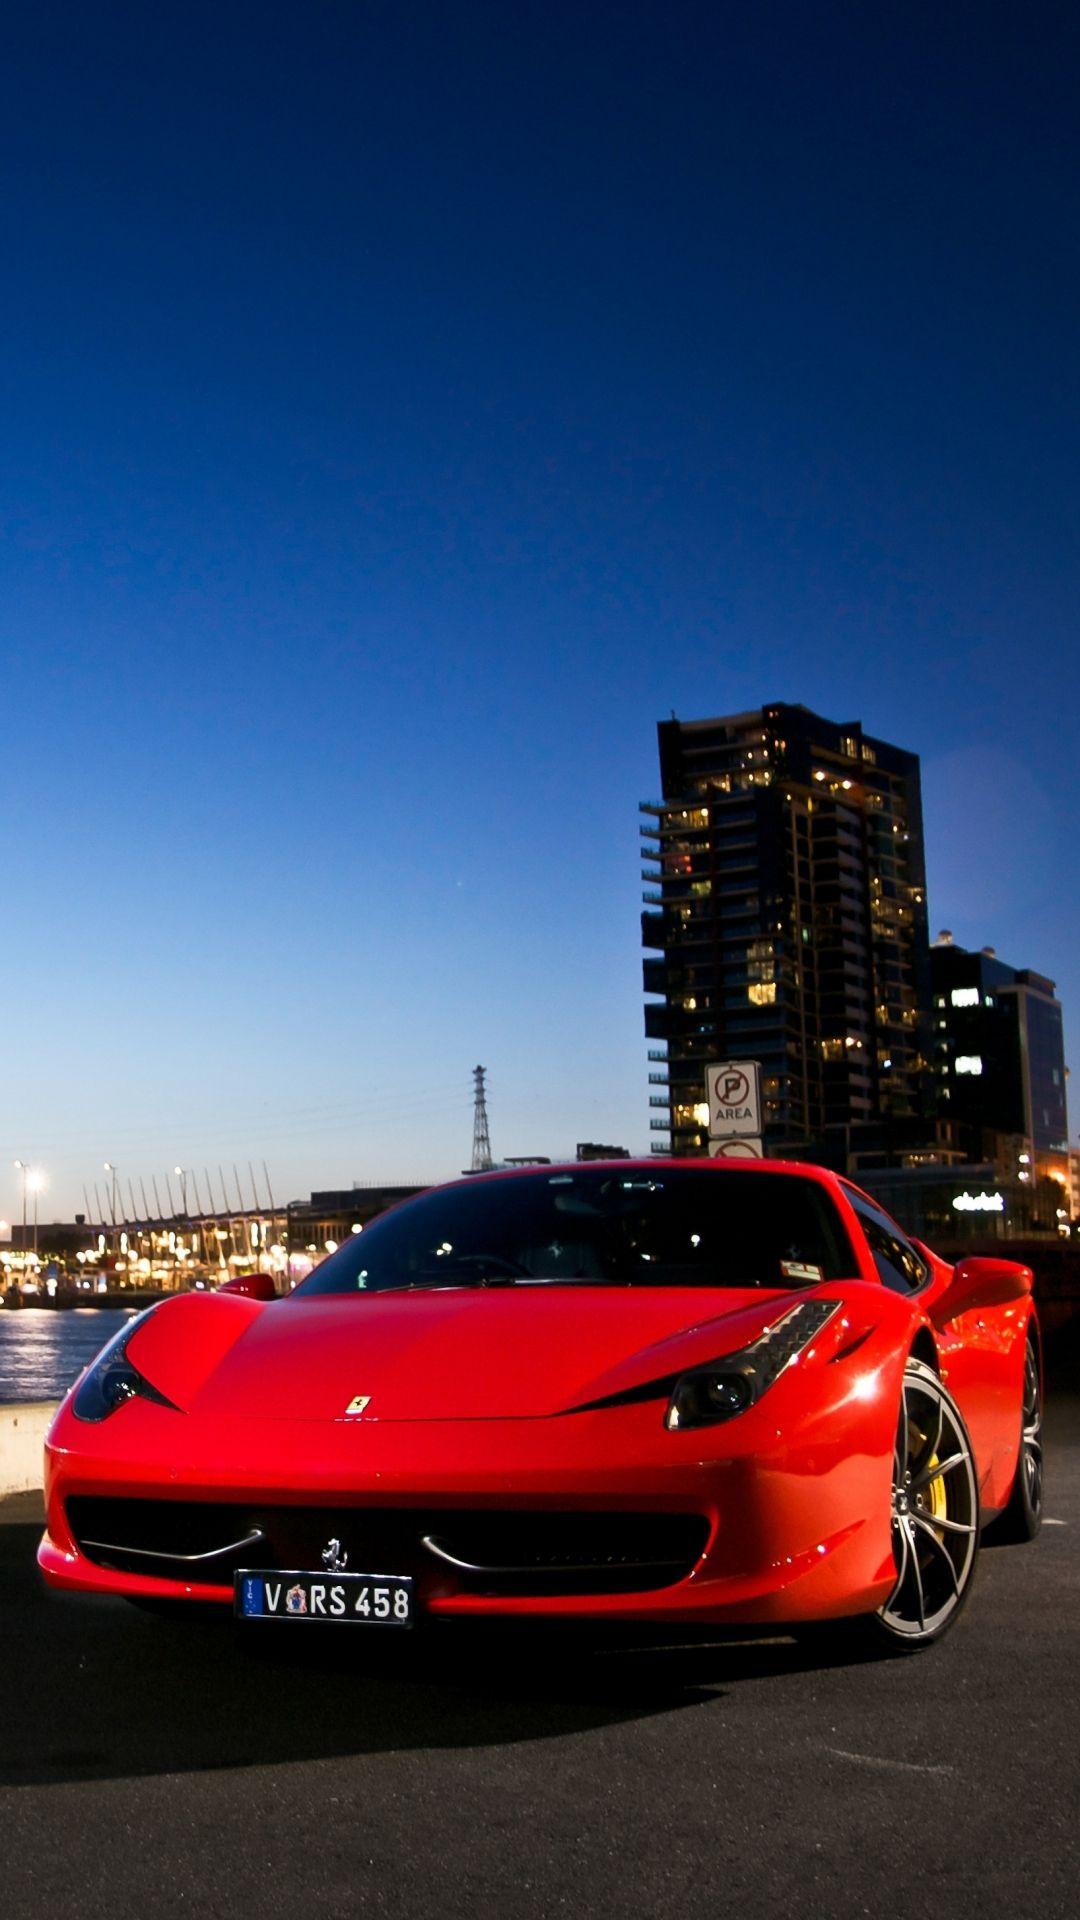 Wallpaper Top Most Dashing And Beautiful Ferrari Car In HD With